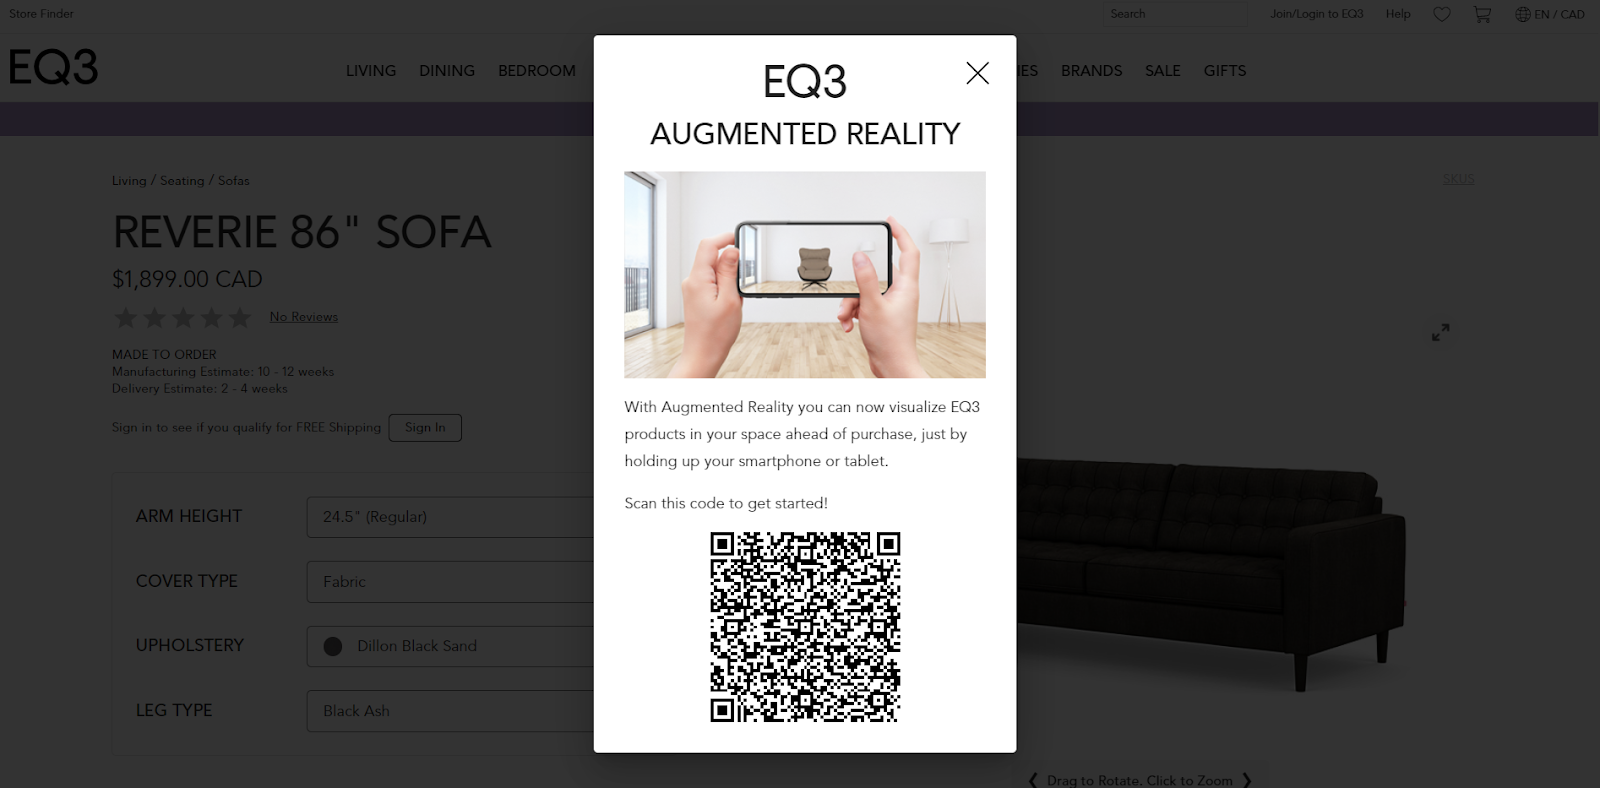 scanning QR to locate a piece of furniture in a real environment using augmented reality